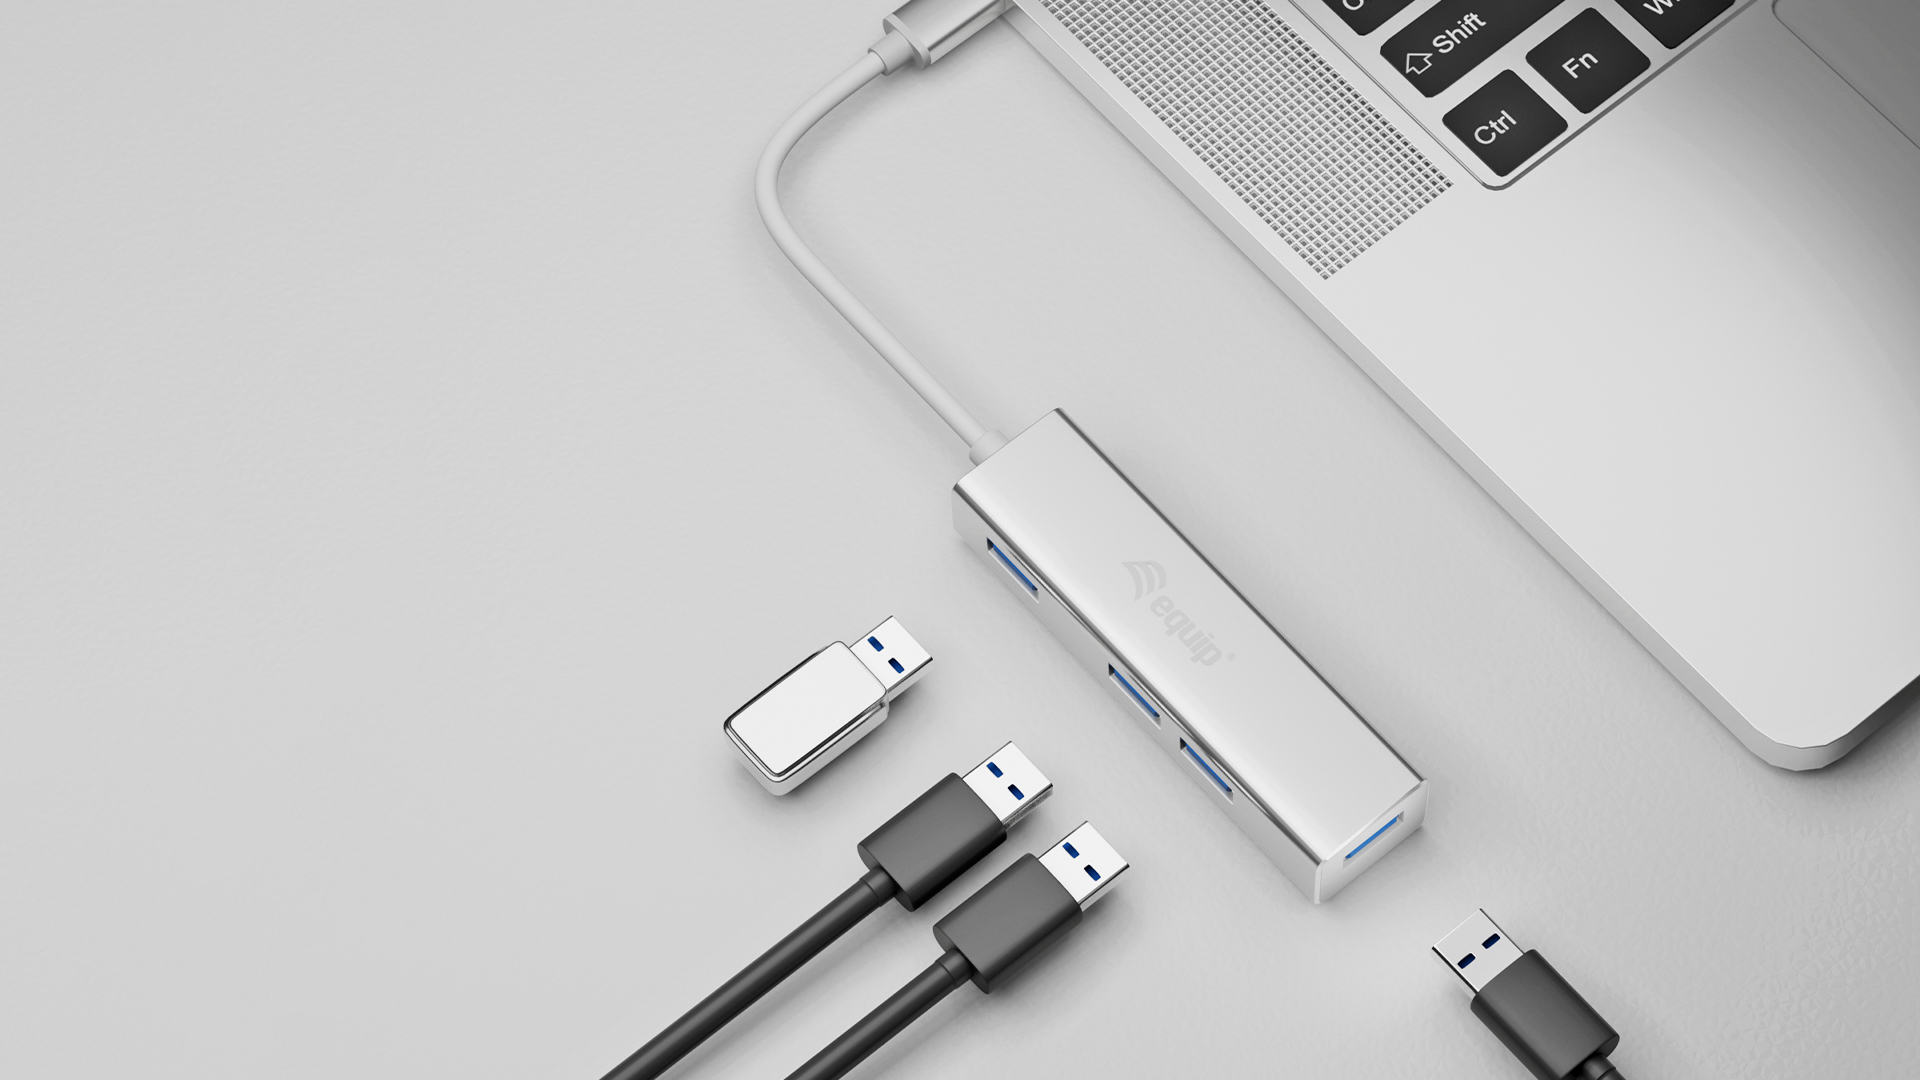 The MacBook Pro doesn't have a USB port, but there's a device for that